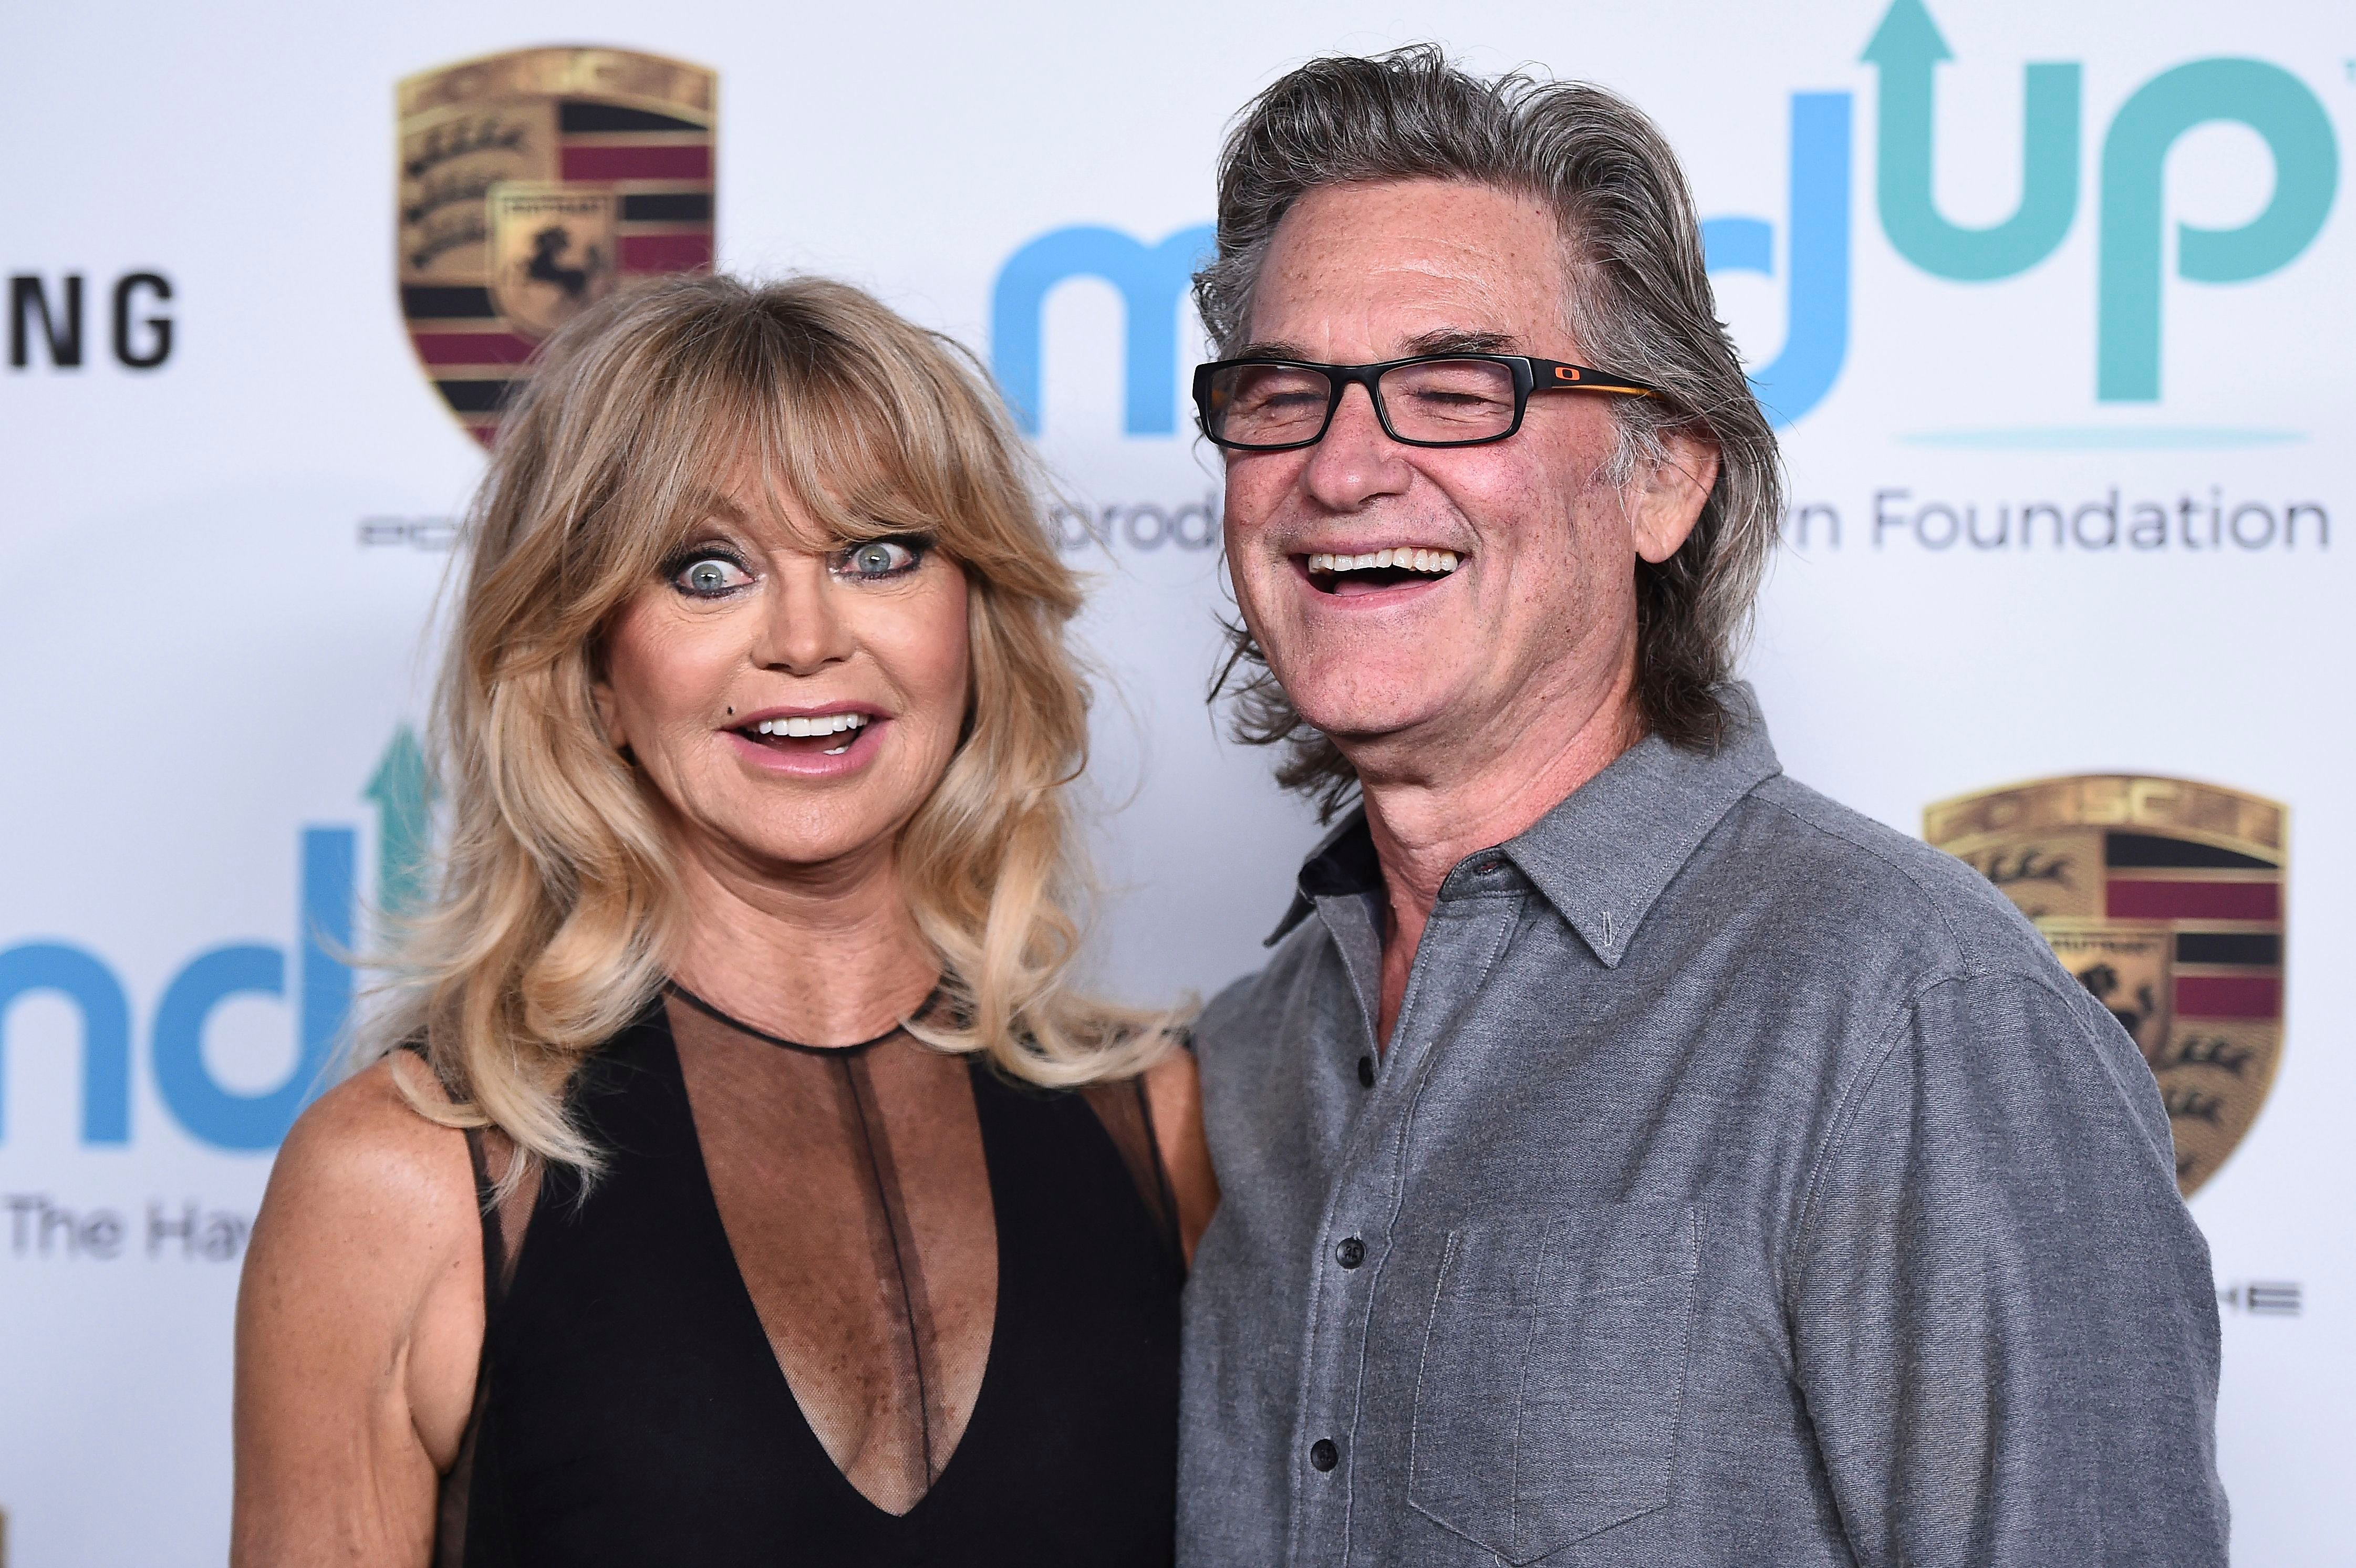 Goldie Hawn's grandson is so grown up as he reunites with famous family  after time apart